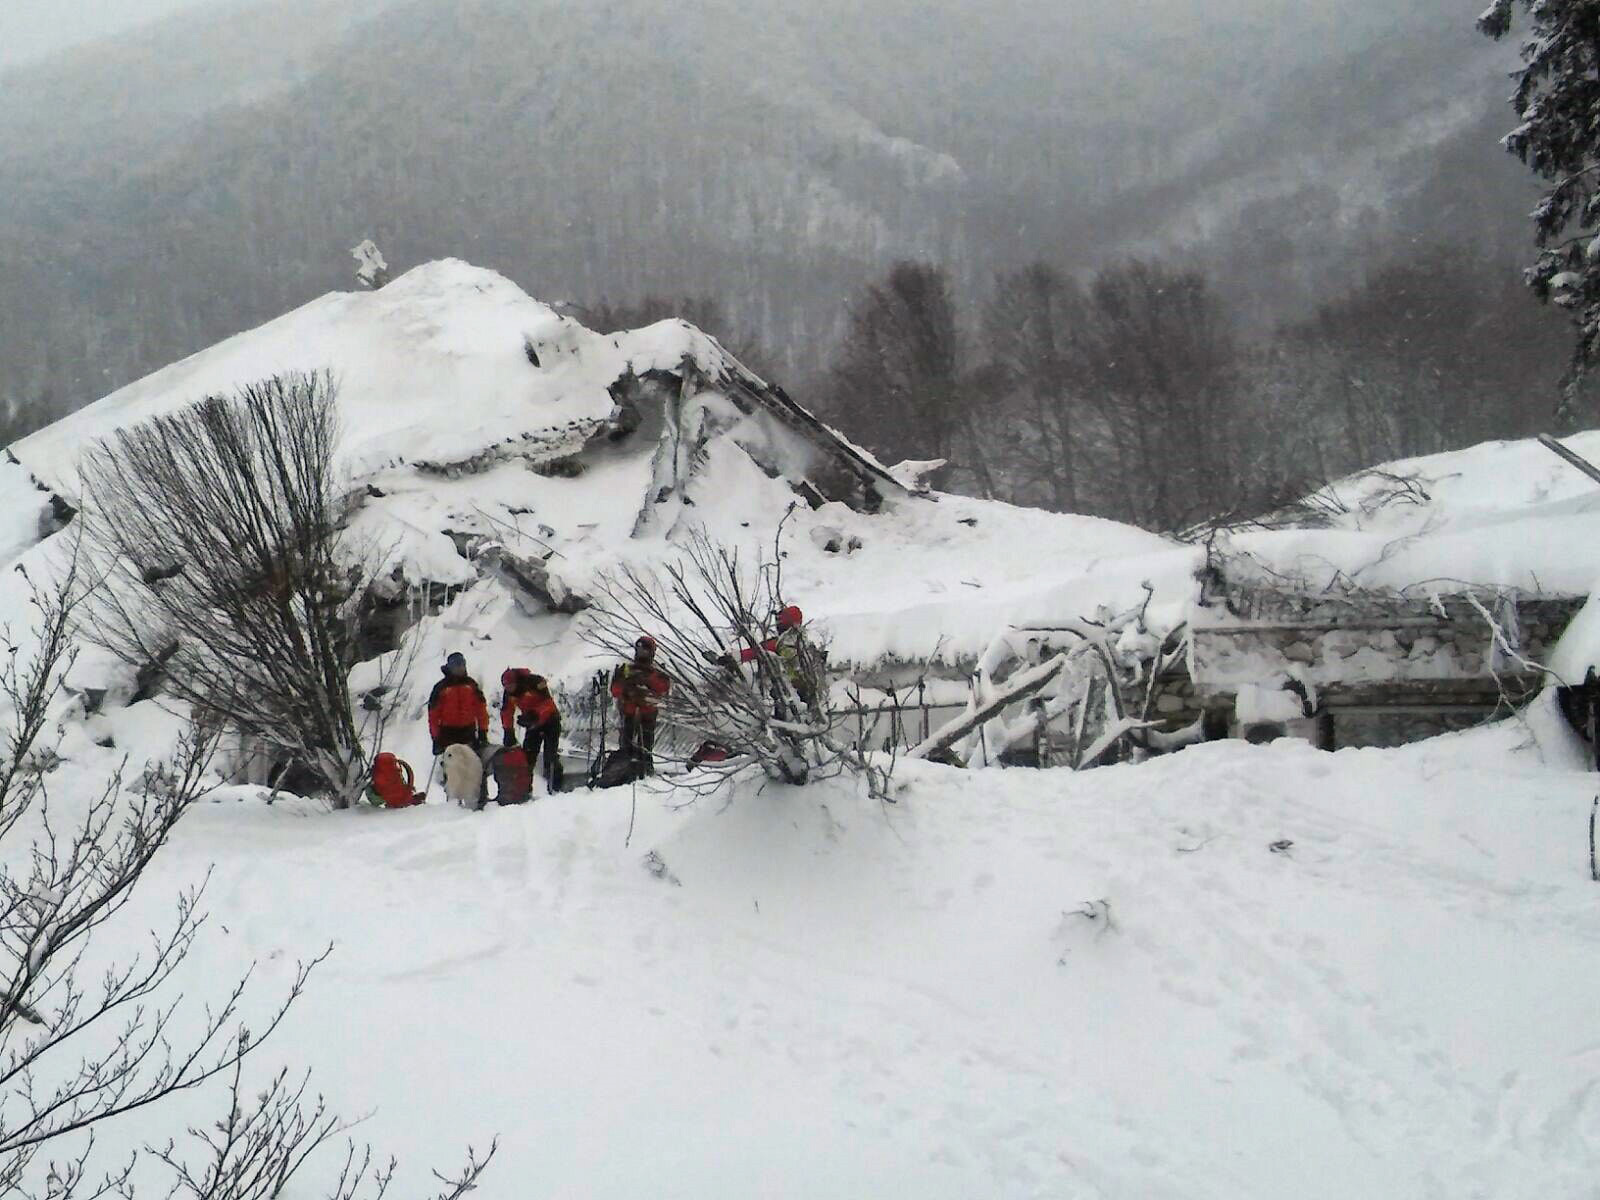 A handout picture released on January 19, 2017 by the Corpo Nazionale Soccorso Alpino e Speleologico (CNSAS) shows rescuers taking part in the salvage operations in front of the Hotel Rigopiano engulfed by a powerful avalanche in Farindola on January 19, 2017, after a 5.7-magnitude earthquake struck the region. Up to 30 people were feared to have died after an Italian mountain Hotel Rigopiano was engulfed by a powerful avalanche in the earthquake-ravaged centre of the country. Italy's Civil Protection agency confirmed the Hotel Rigopiano had been engulfed by a two-metre (six-feet) high wall of snow and that emergency services were struggling to get ambulances and diggers to the site. / AFP PHOTO / CNSAS / ANDREAS SOLARO / RESTRICTED TO EDITORIAL USE - MANDATORY CREDIT "AFP PHOTO /CNSAS" - NO MARKETING NO ADVERTISING CAMPAIGNS - DISTRIBUTED AS A SERVICE TO CLIENTS